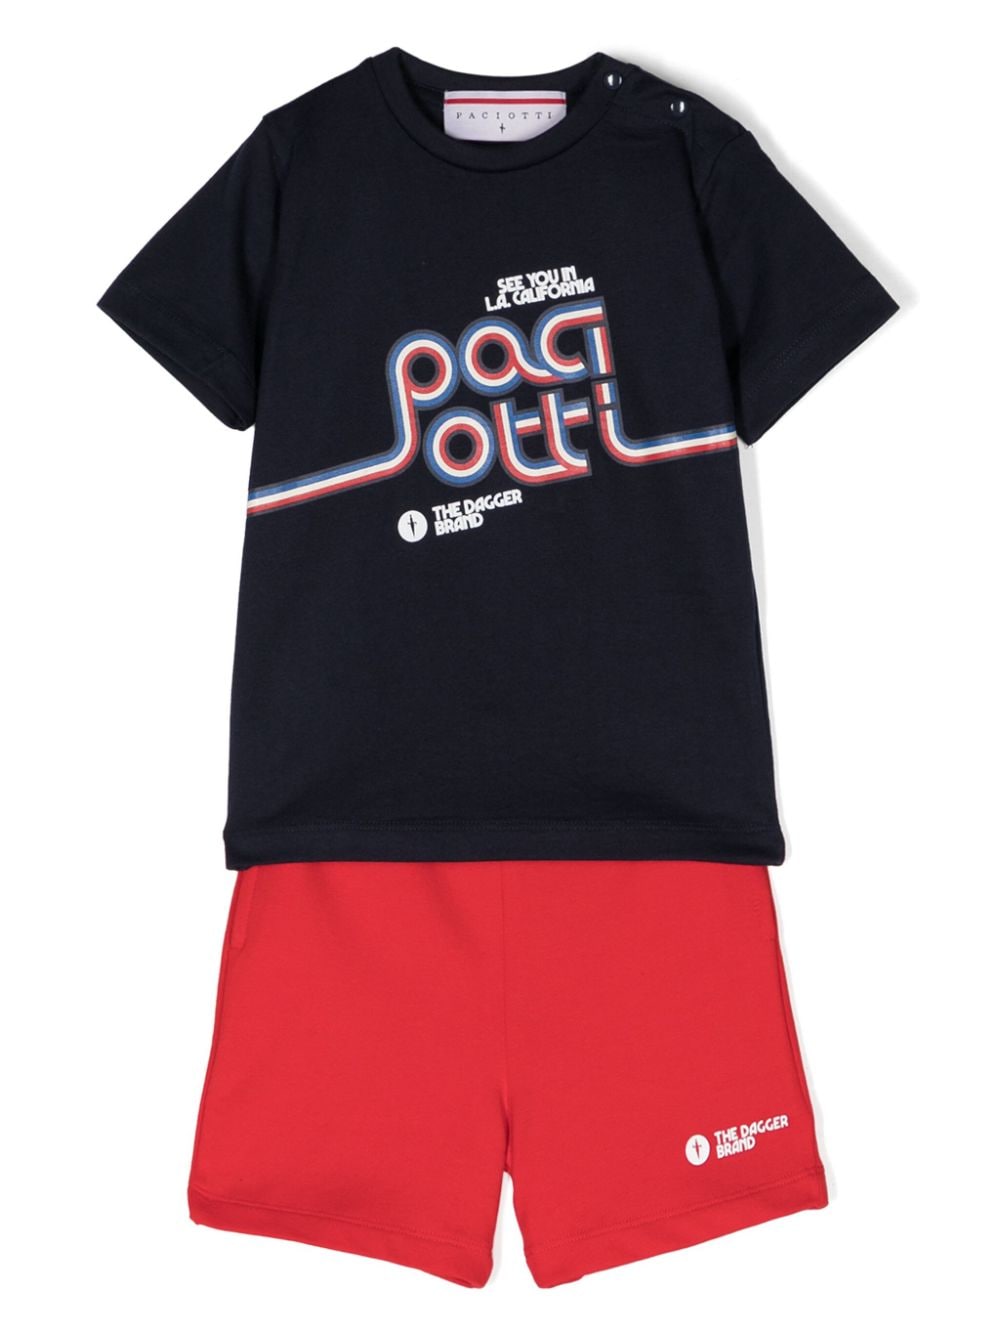 Blue and red sports outfit for newborns with logo